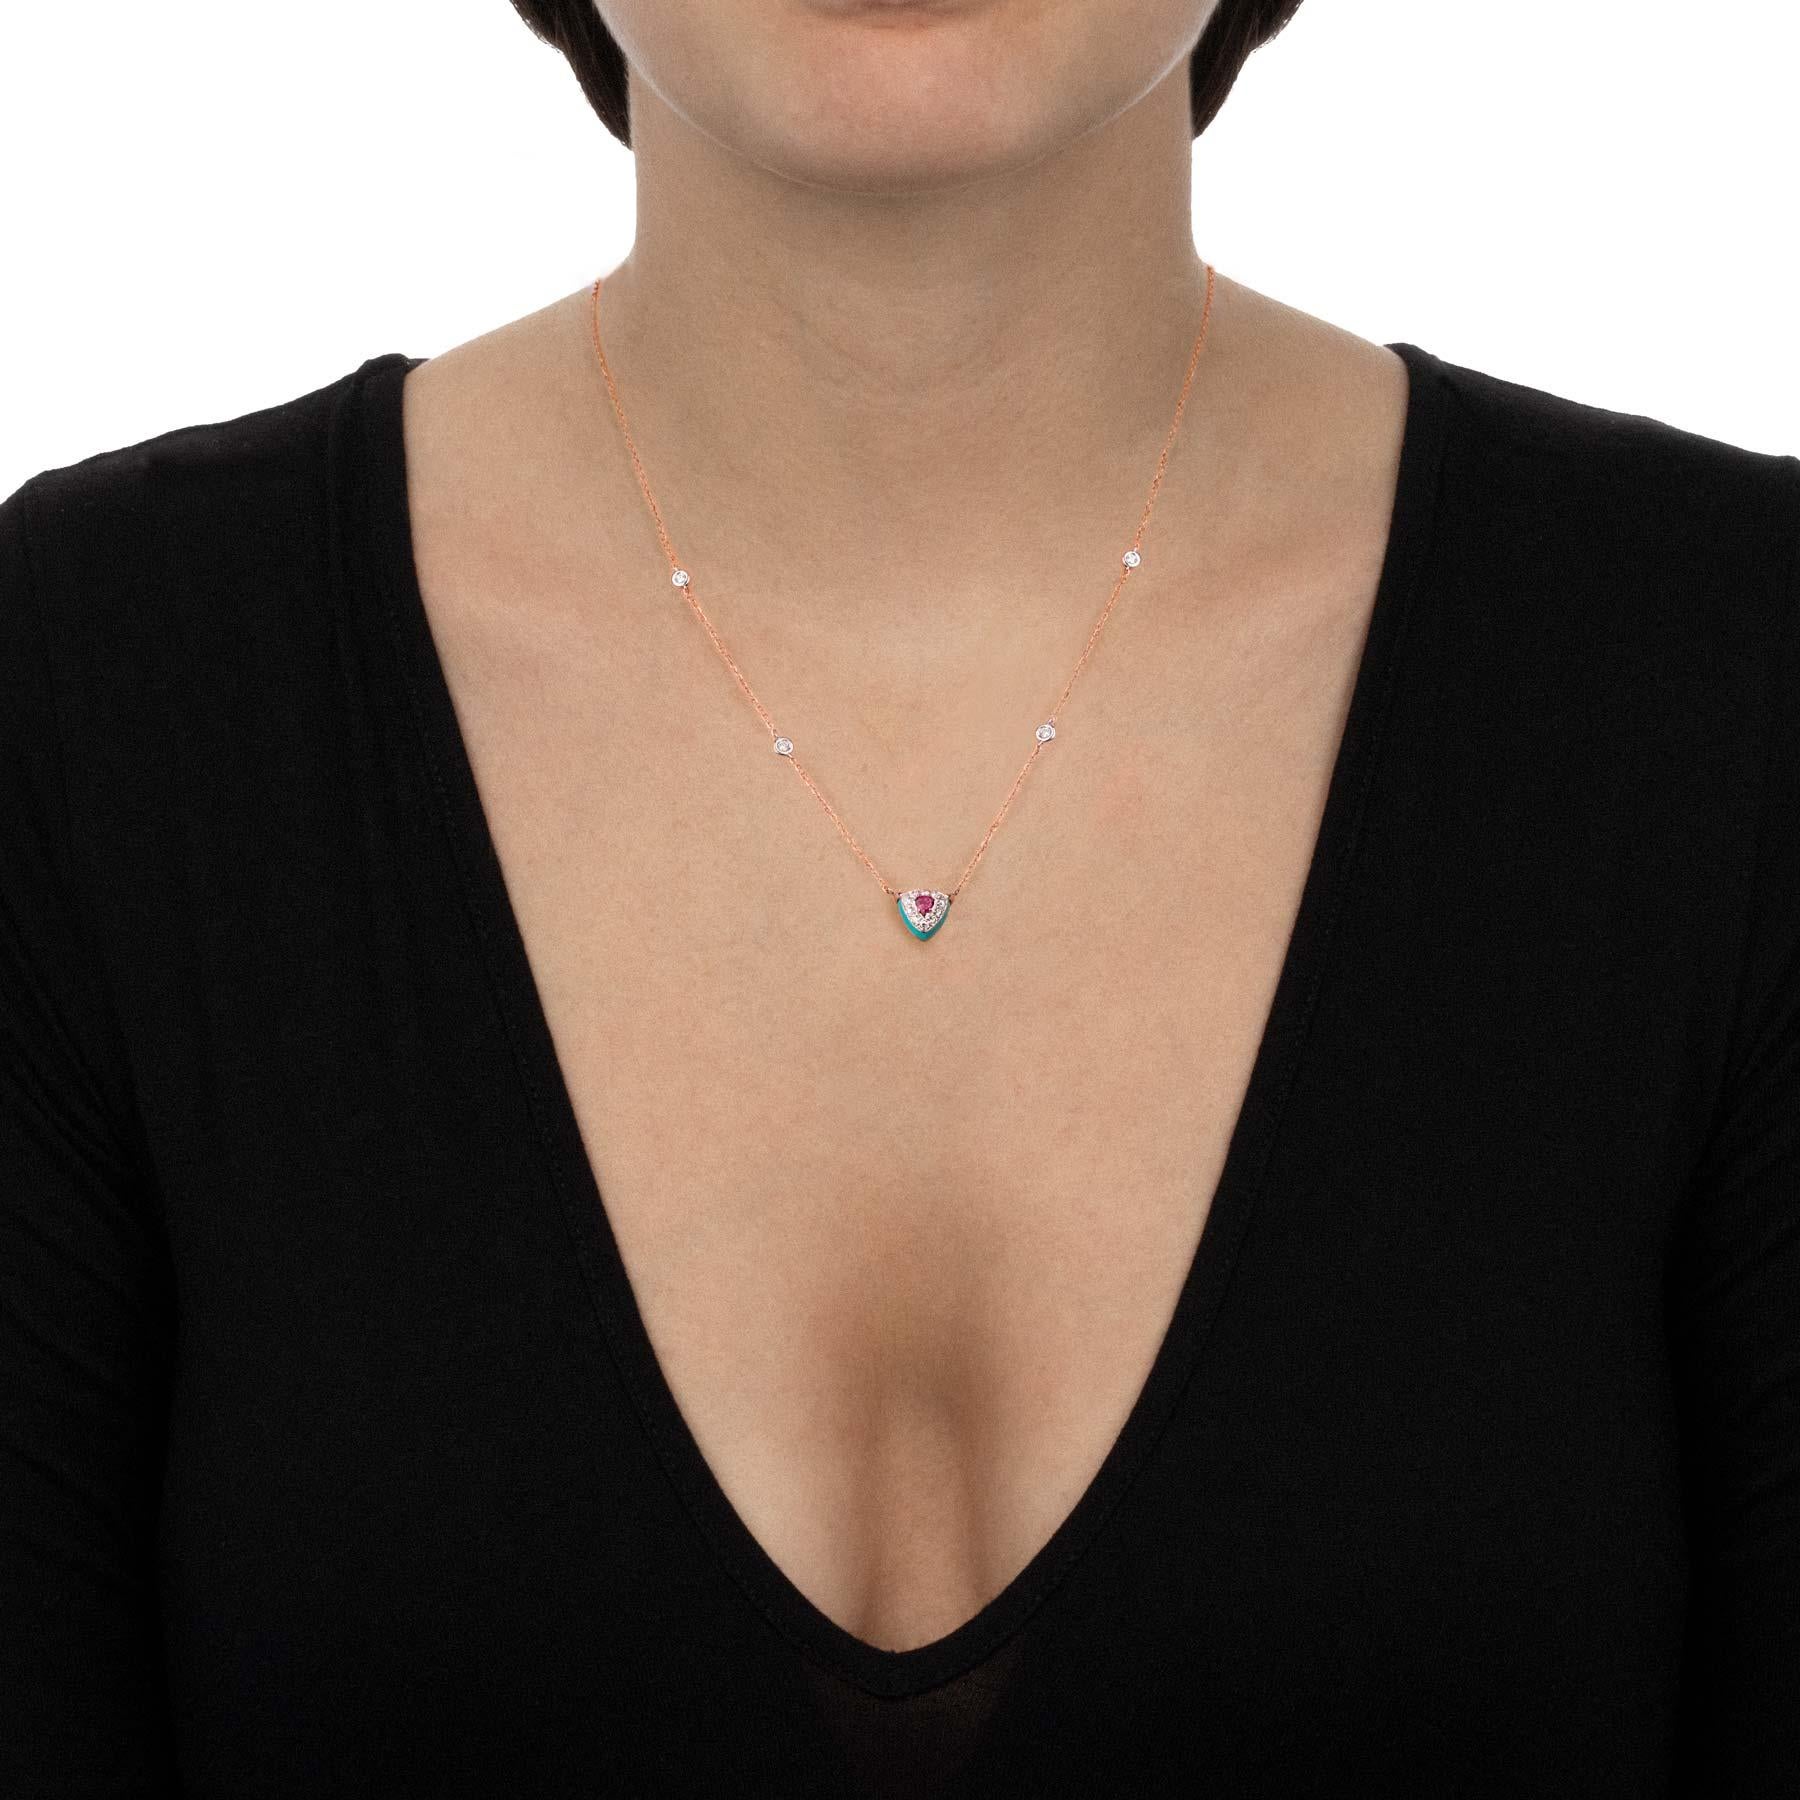 Different shades and never boring contrasts are the aesthetic key of this rose gold necklace. The colored stones harmonize their tones with the brightness of numerous diamonds. Flashes of elegance and refinement.

Necklace lenght 43 cm with